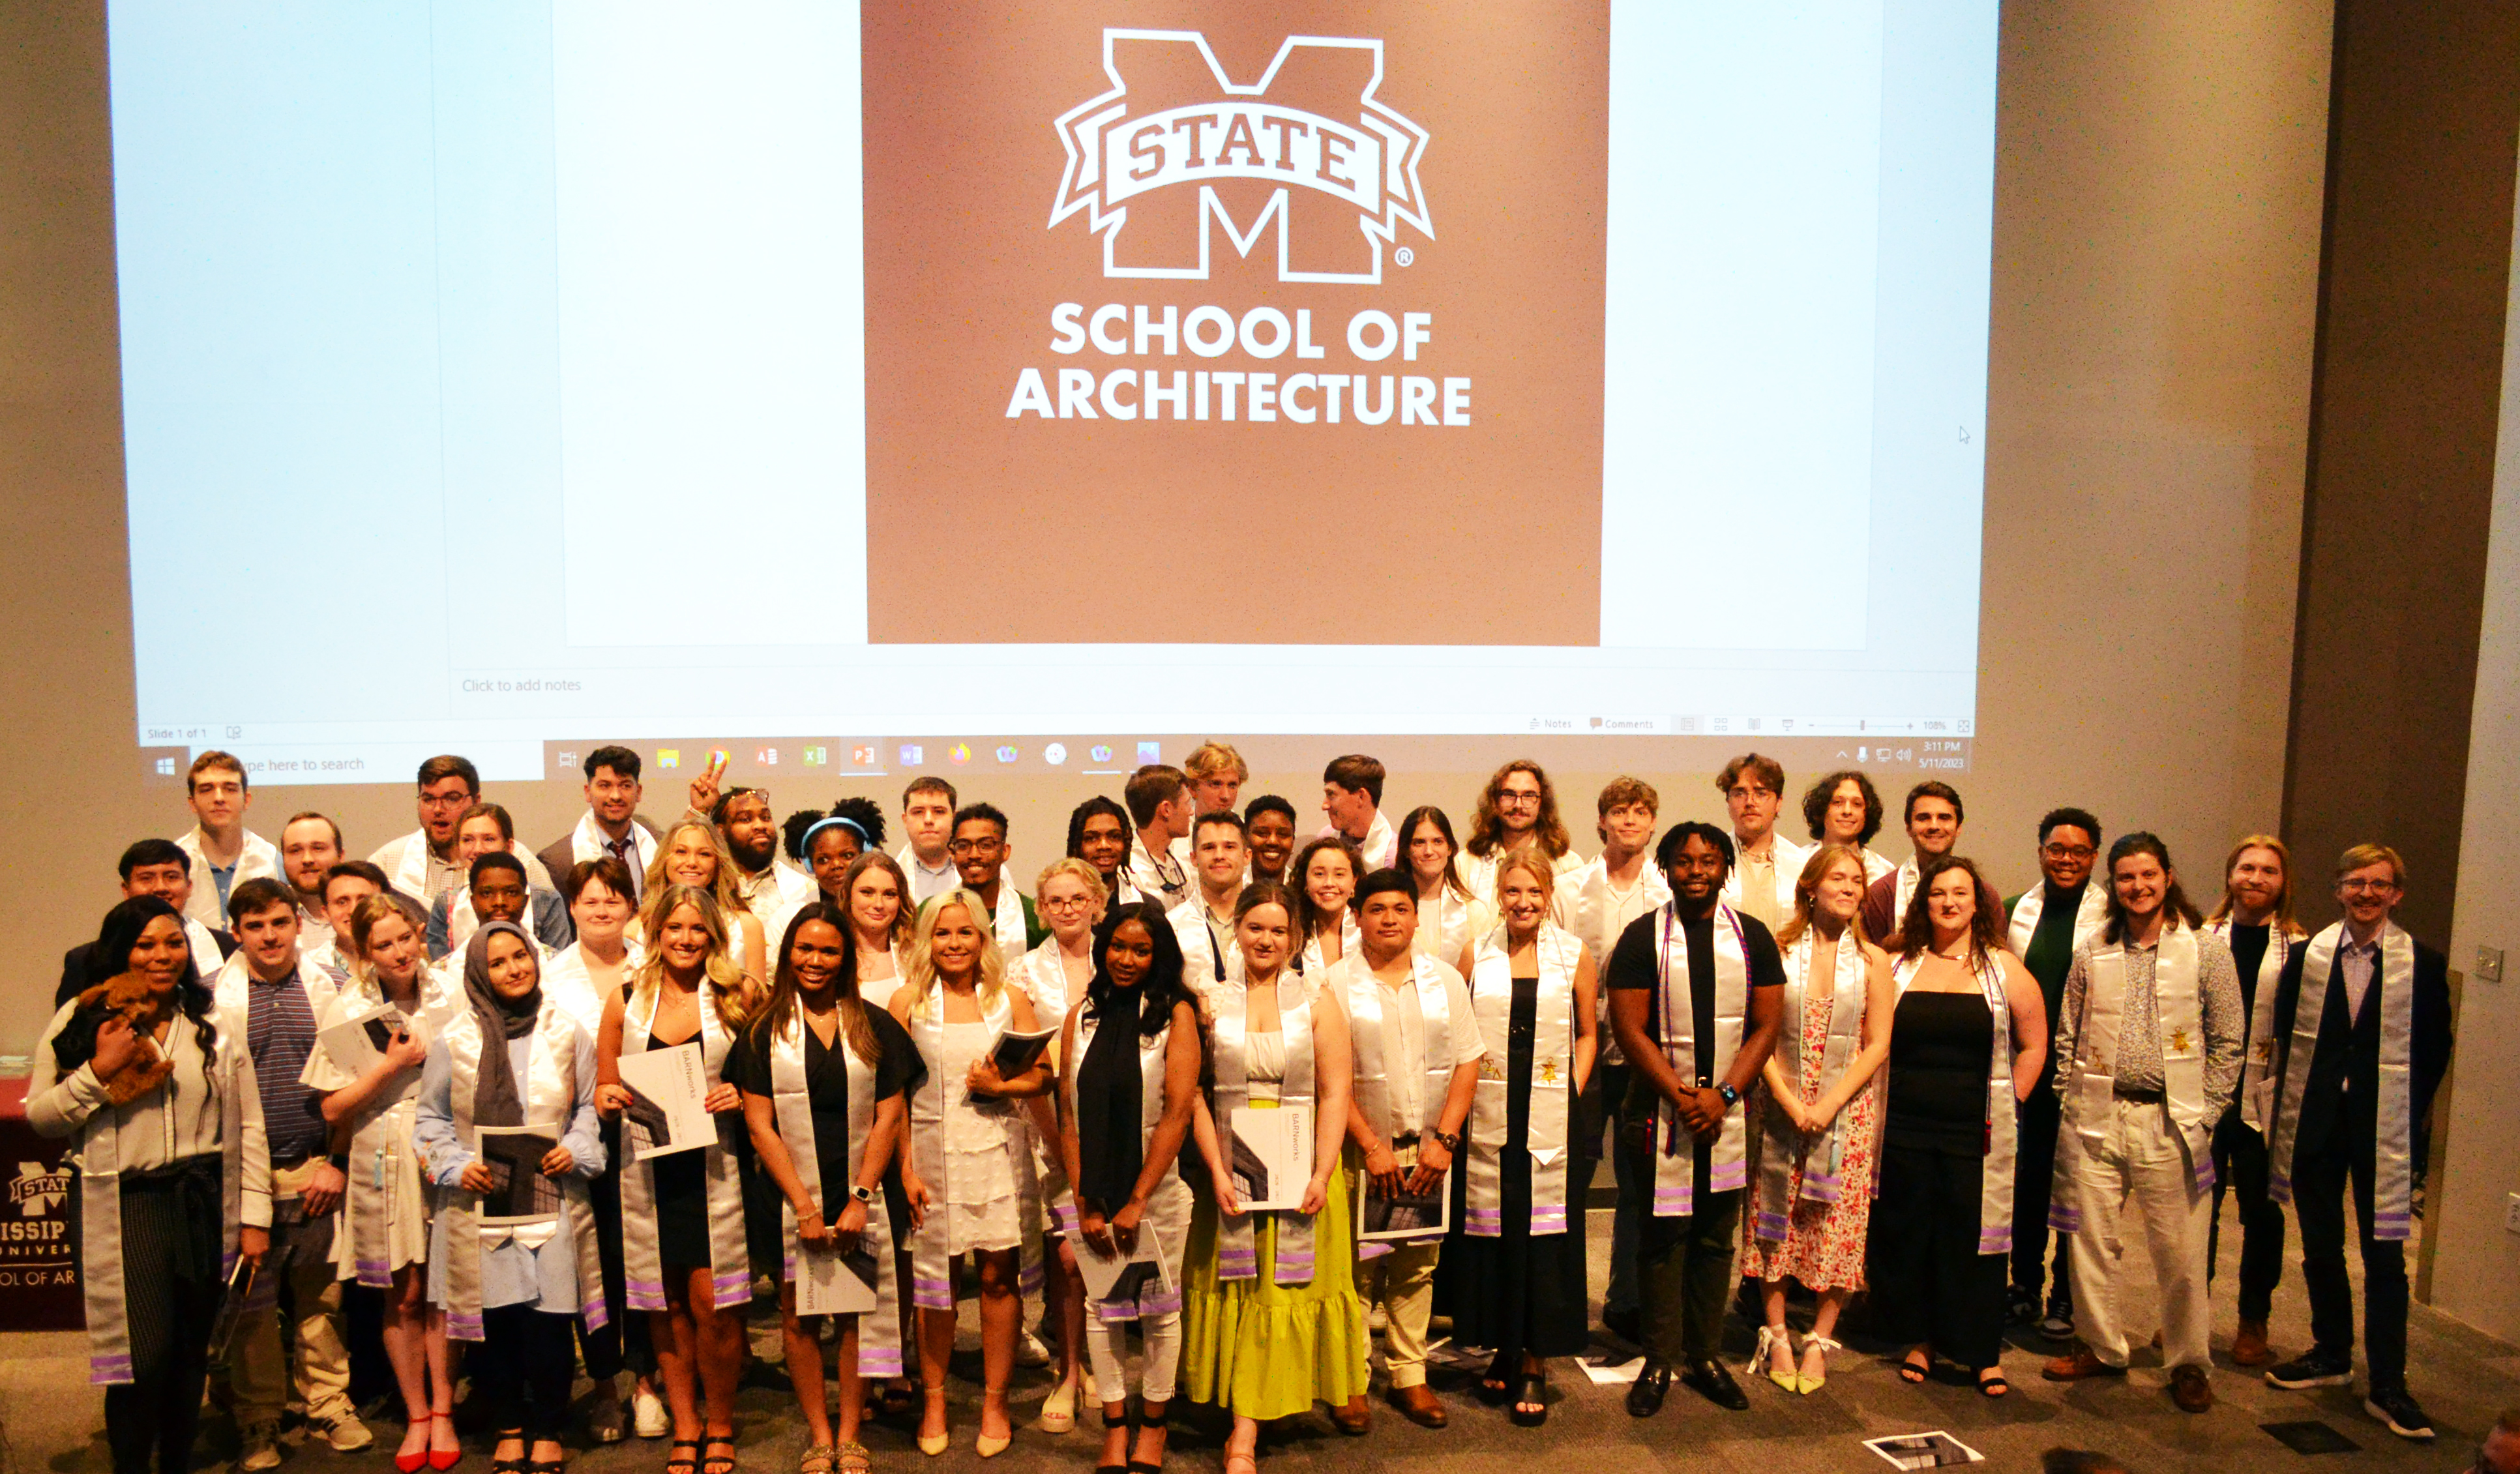 MSU School of Architecture class of 2023 gathered on stage for photo